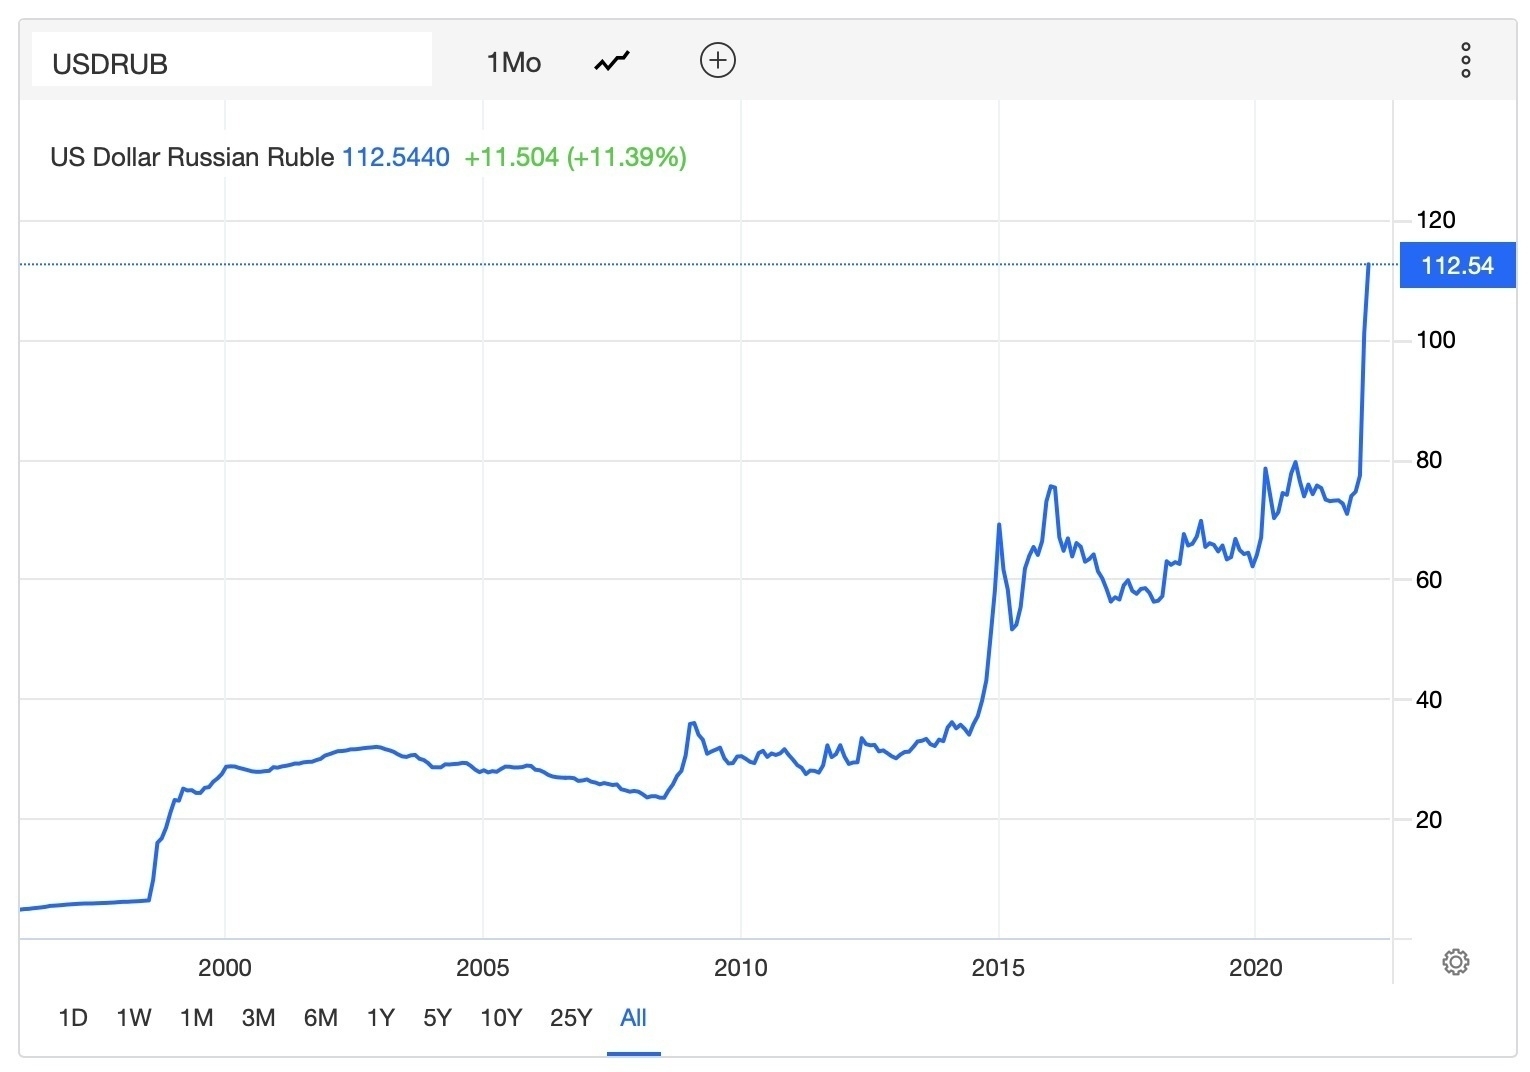 25 years of the Russian ruble valued from ~15/dollar to ~111/dollar.